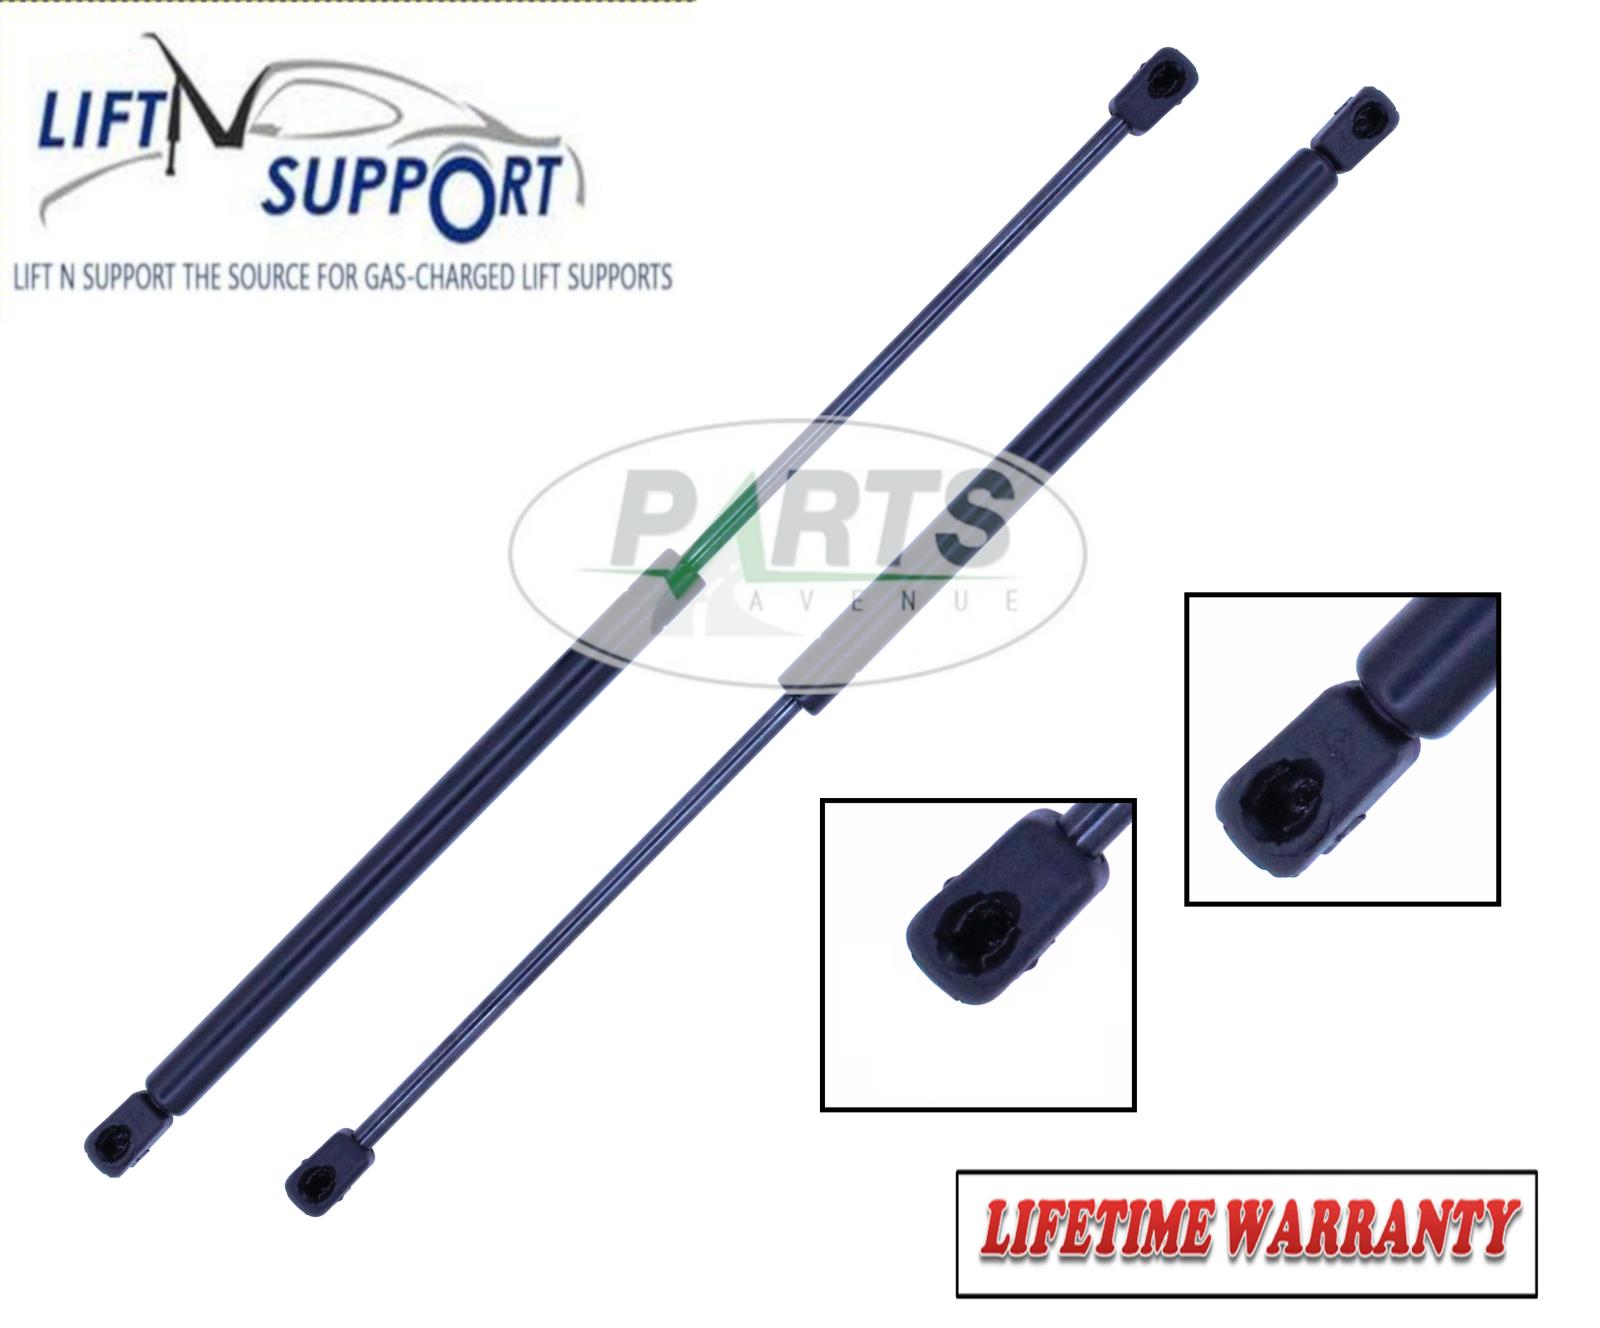 2 REAR GATE TRUNK LIFTGATE TAILGATE DOOR HATCH LIFT SUPPORTS SHOCKS STRUTS ARMS